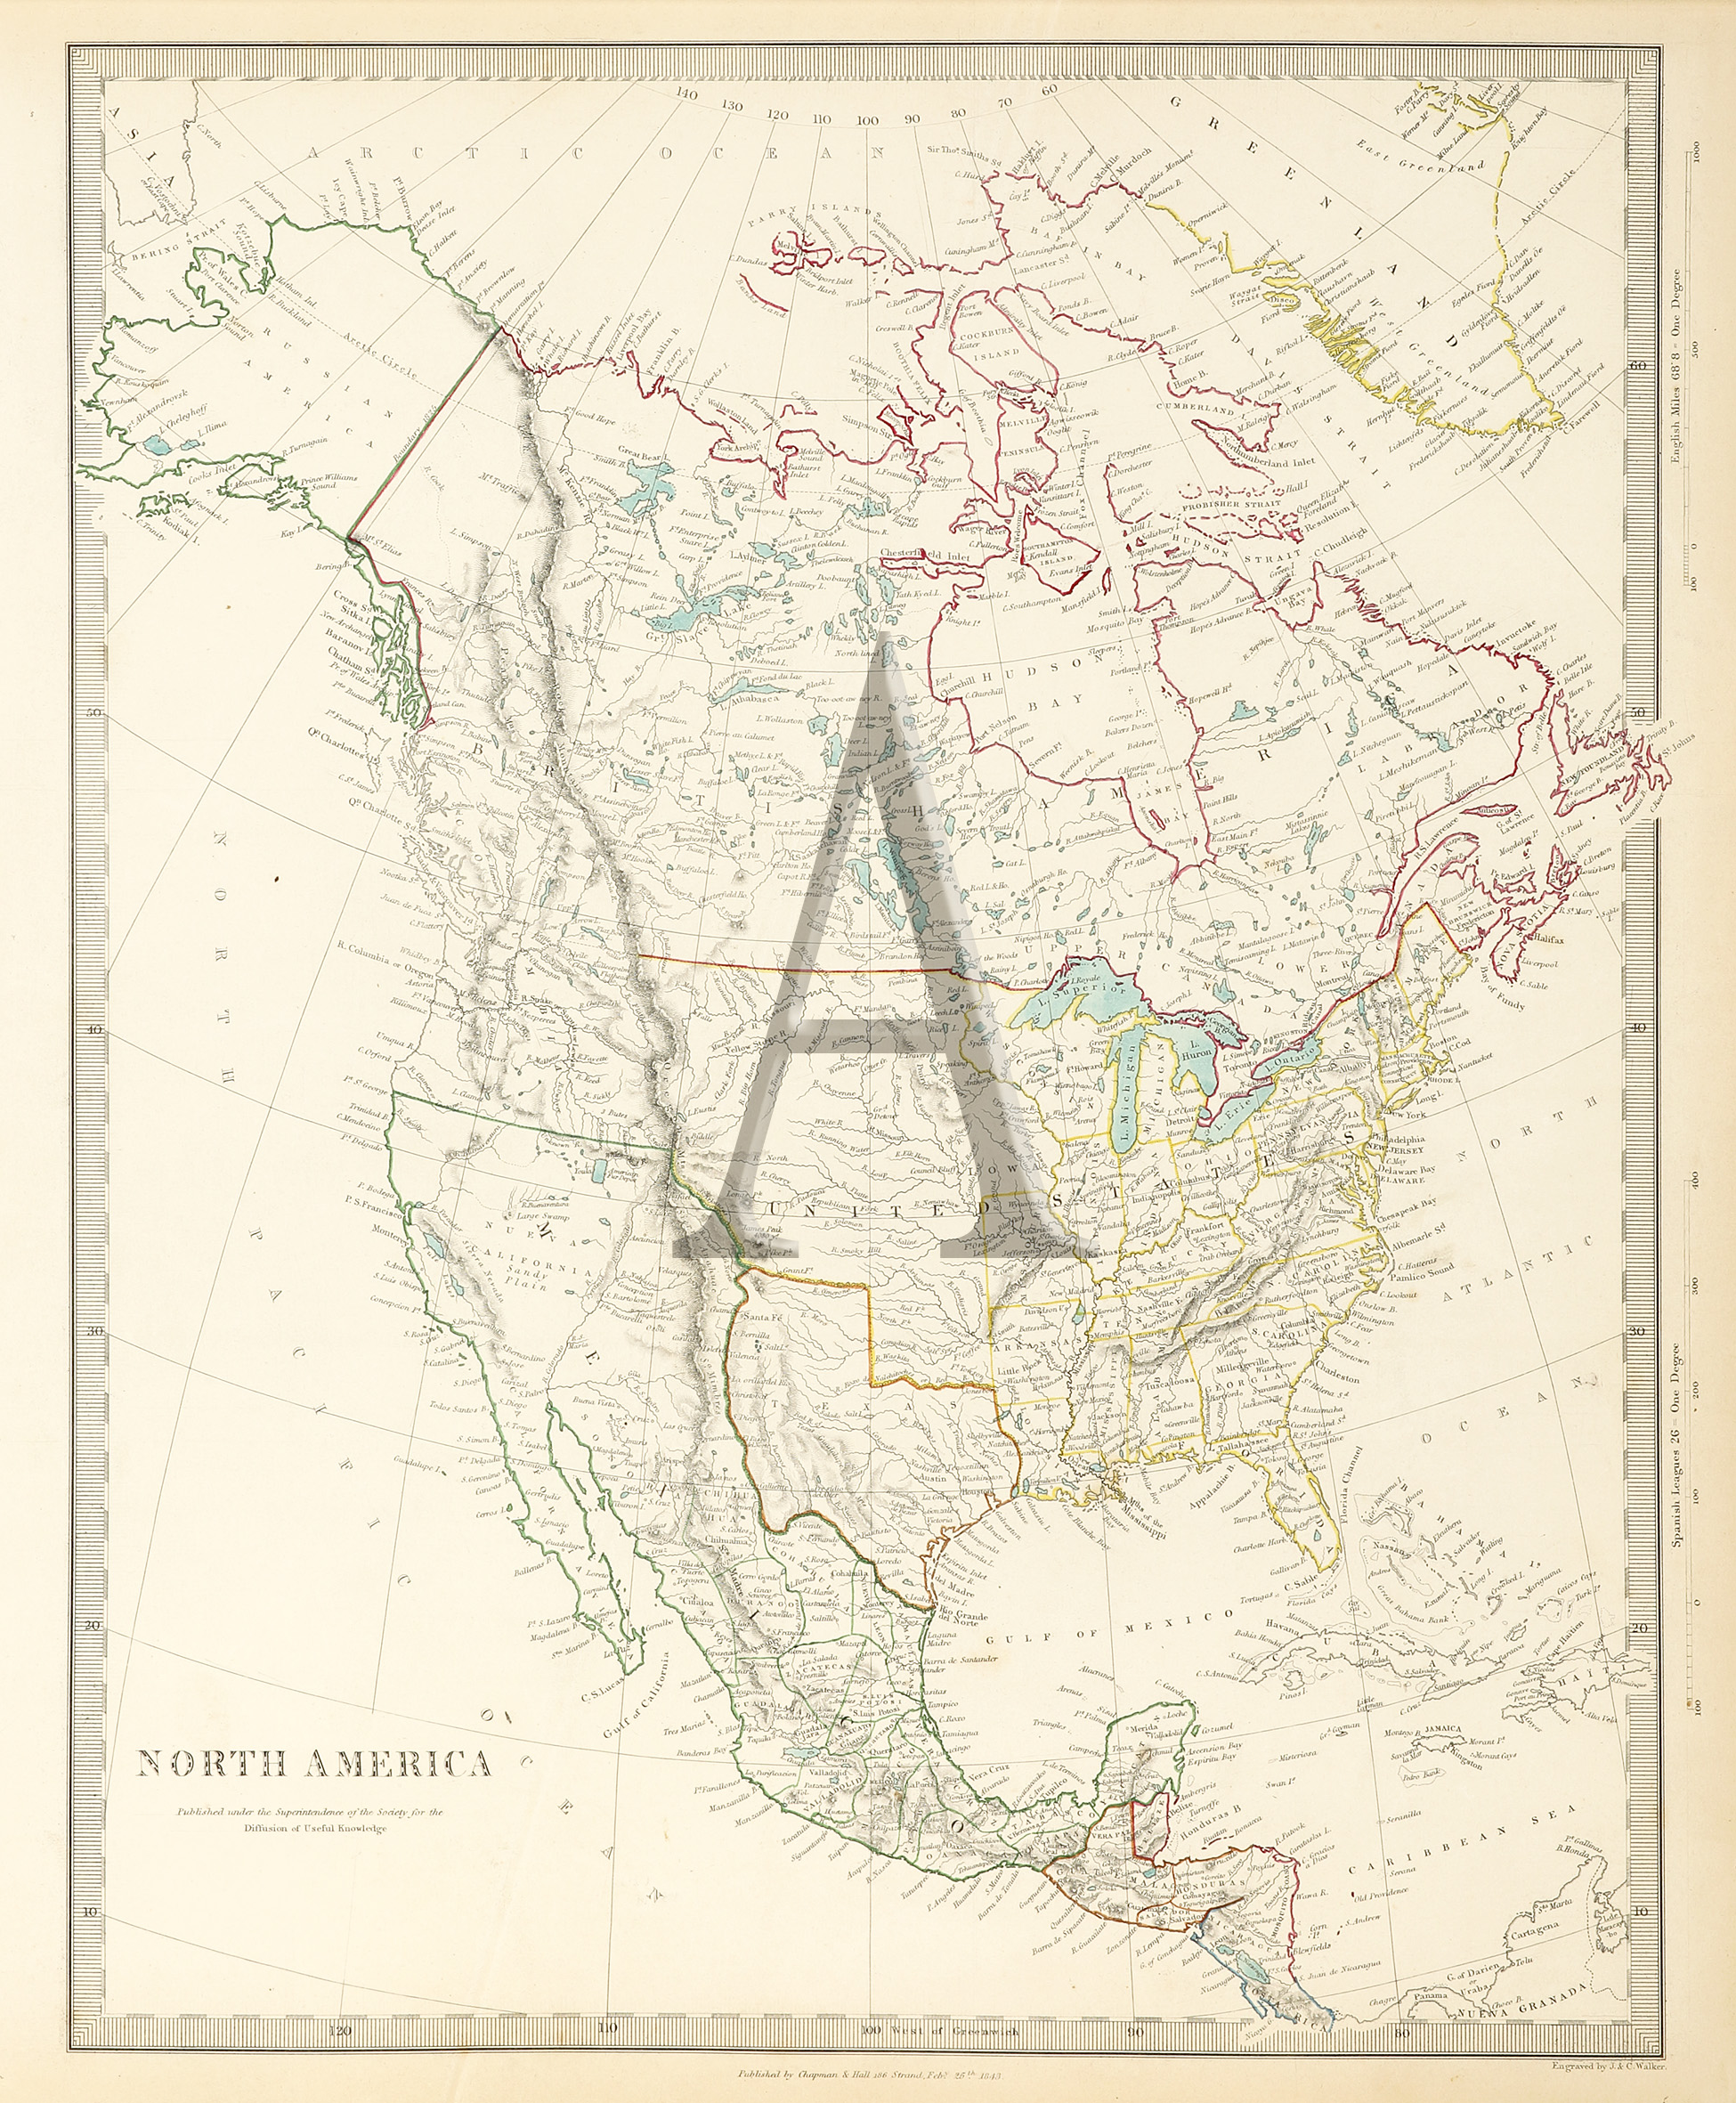 North America - Antique Print from 1843